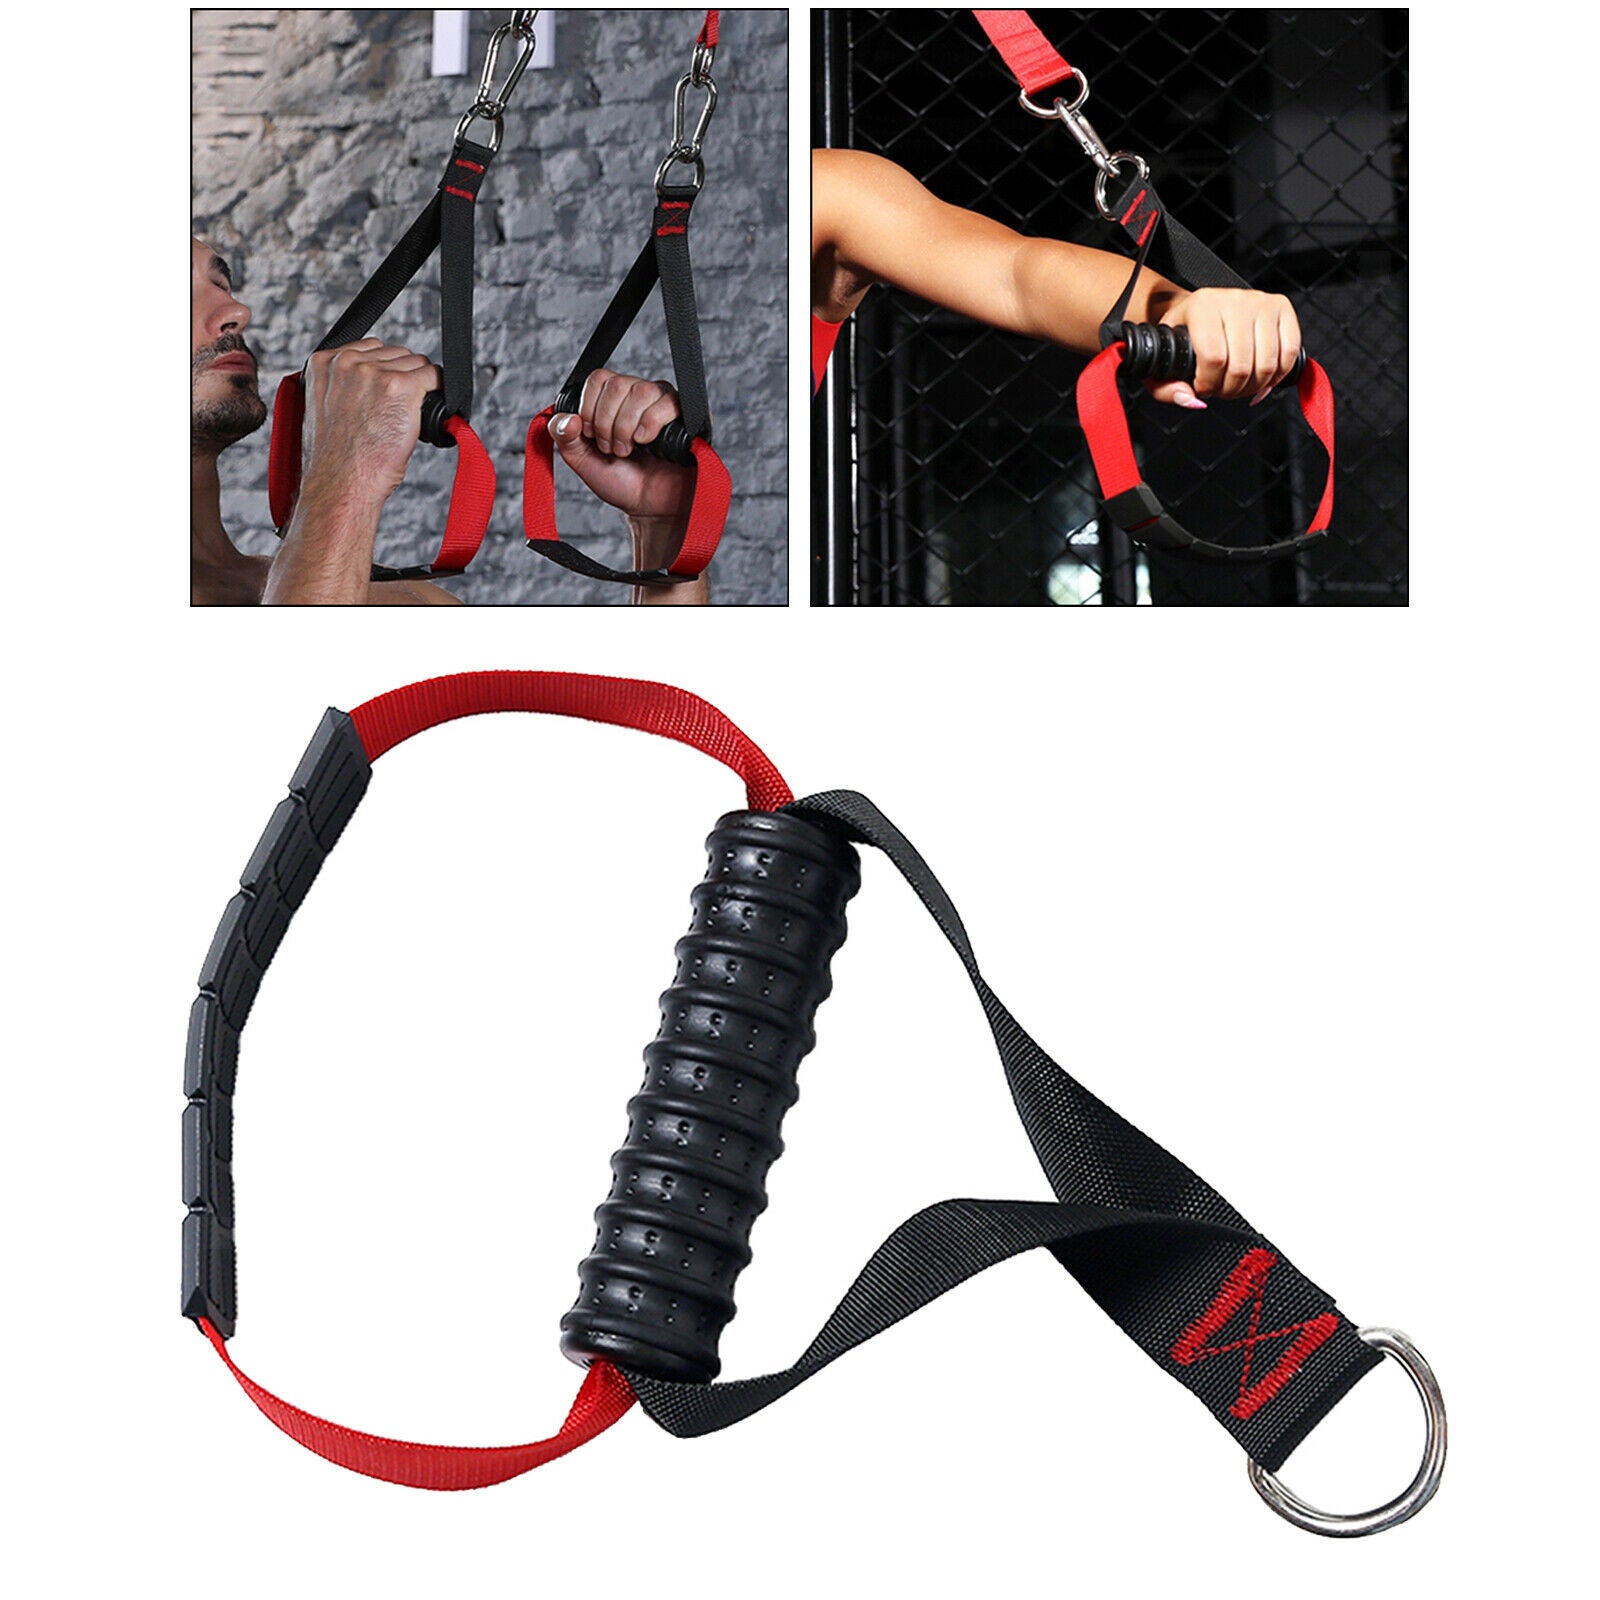 Resistance Bands Handle Grips for Cables LAT Pull Down Fitness Attachment